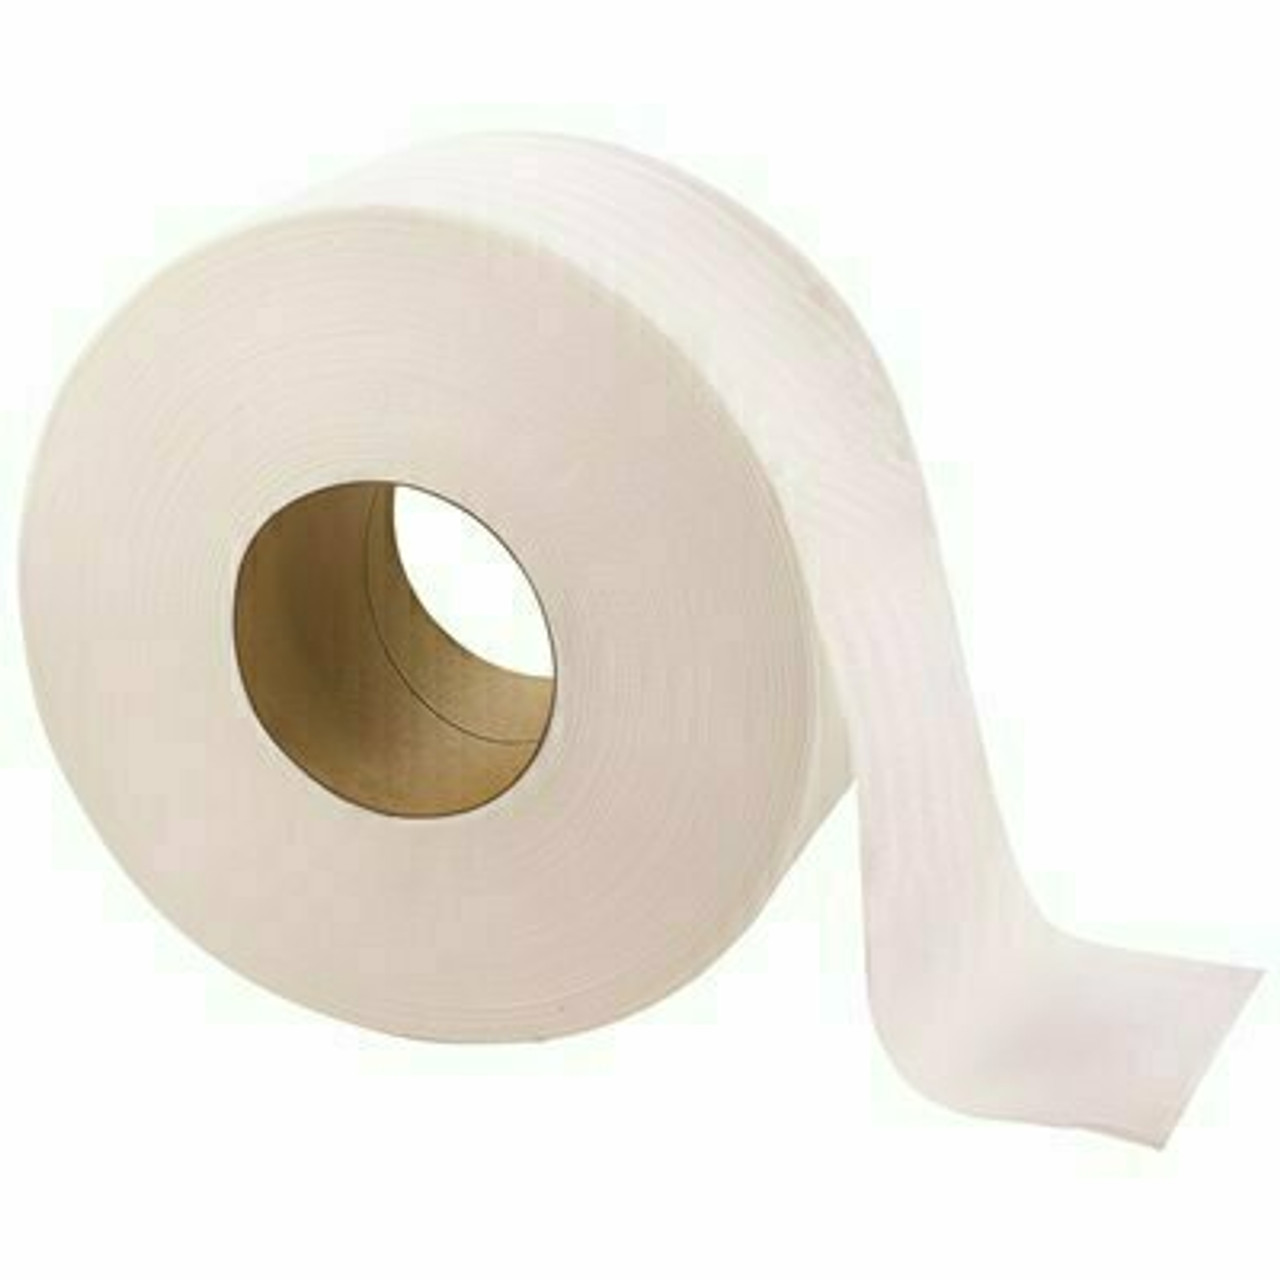 Renown 600 Ft. 2-Ply Premium Jrt Soft Superior Quality Embossed Bath Tissue/Toilet Paper In Bright White (12-Rolls/Case)